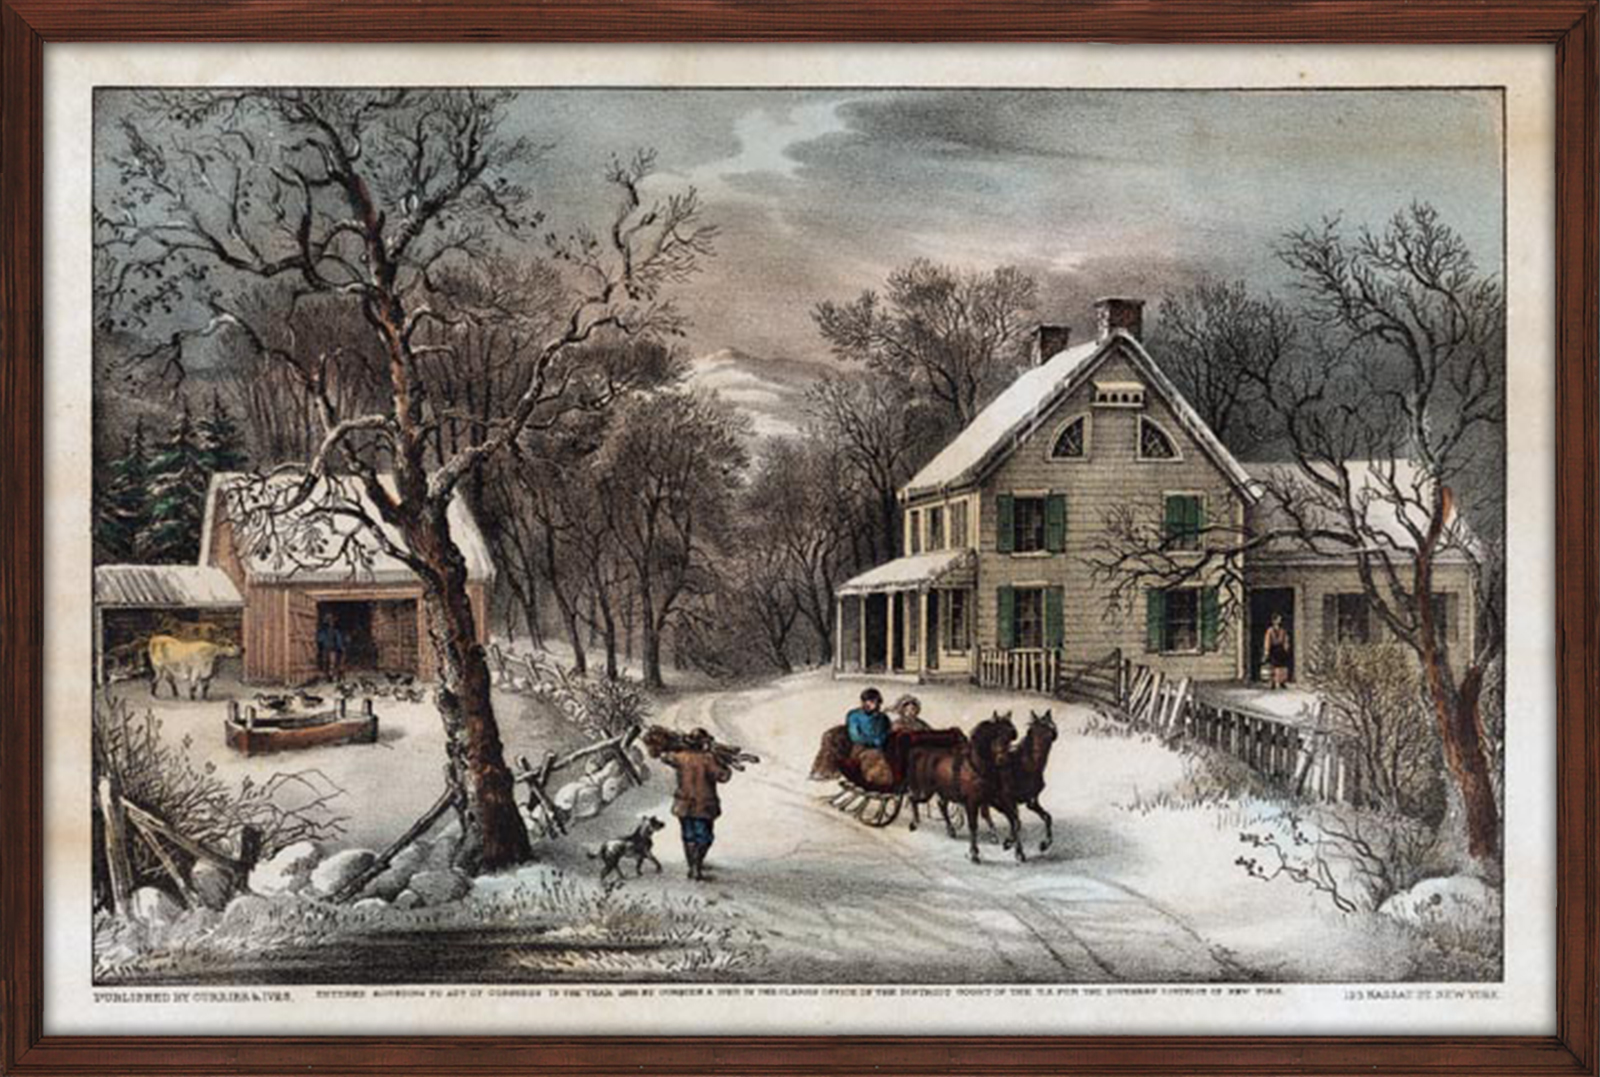 Currier and Ives print of an American homestead in winter inside a wooden frame.